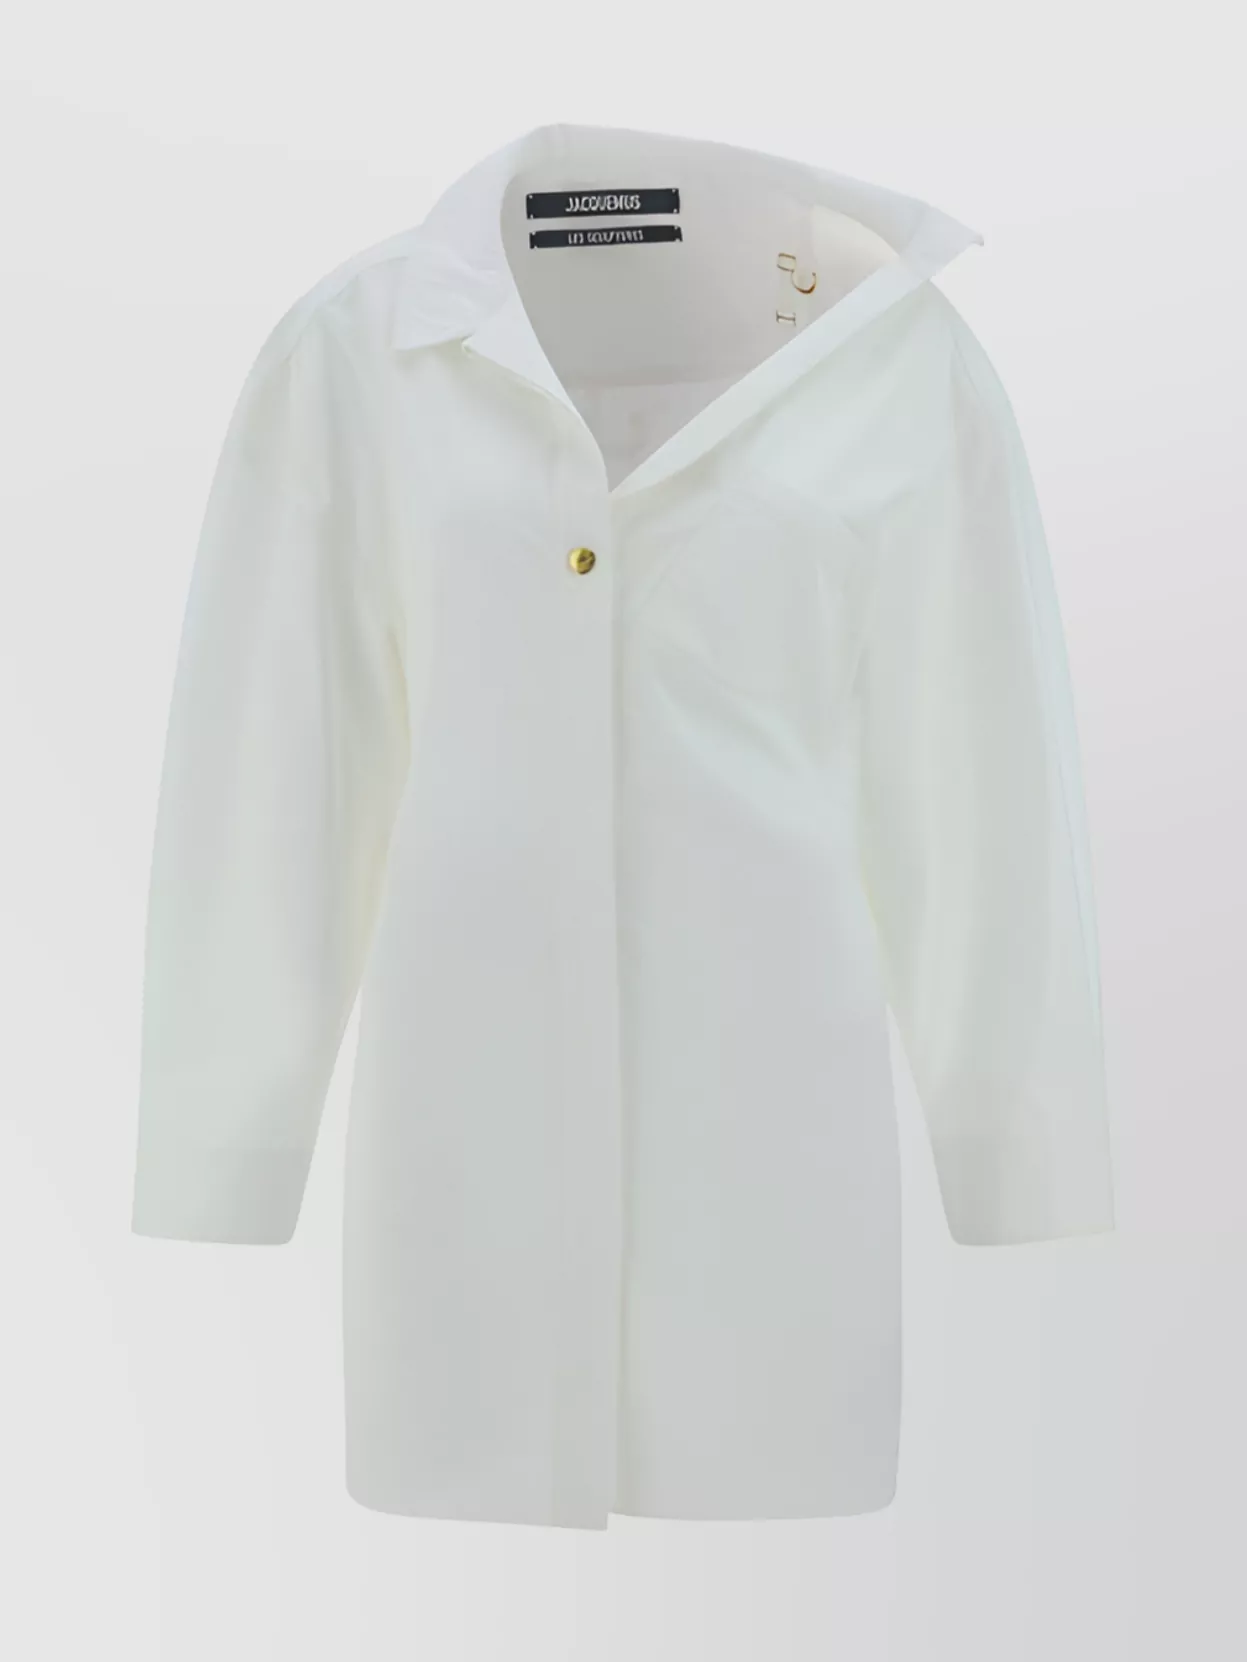 Jacquemus Shirt Dress Belted Waist In White